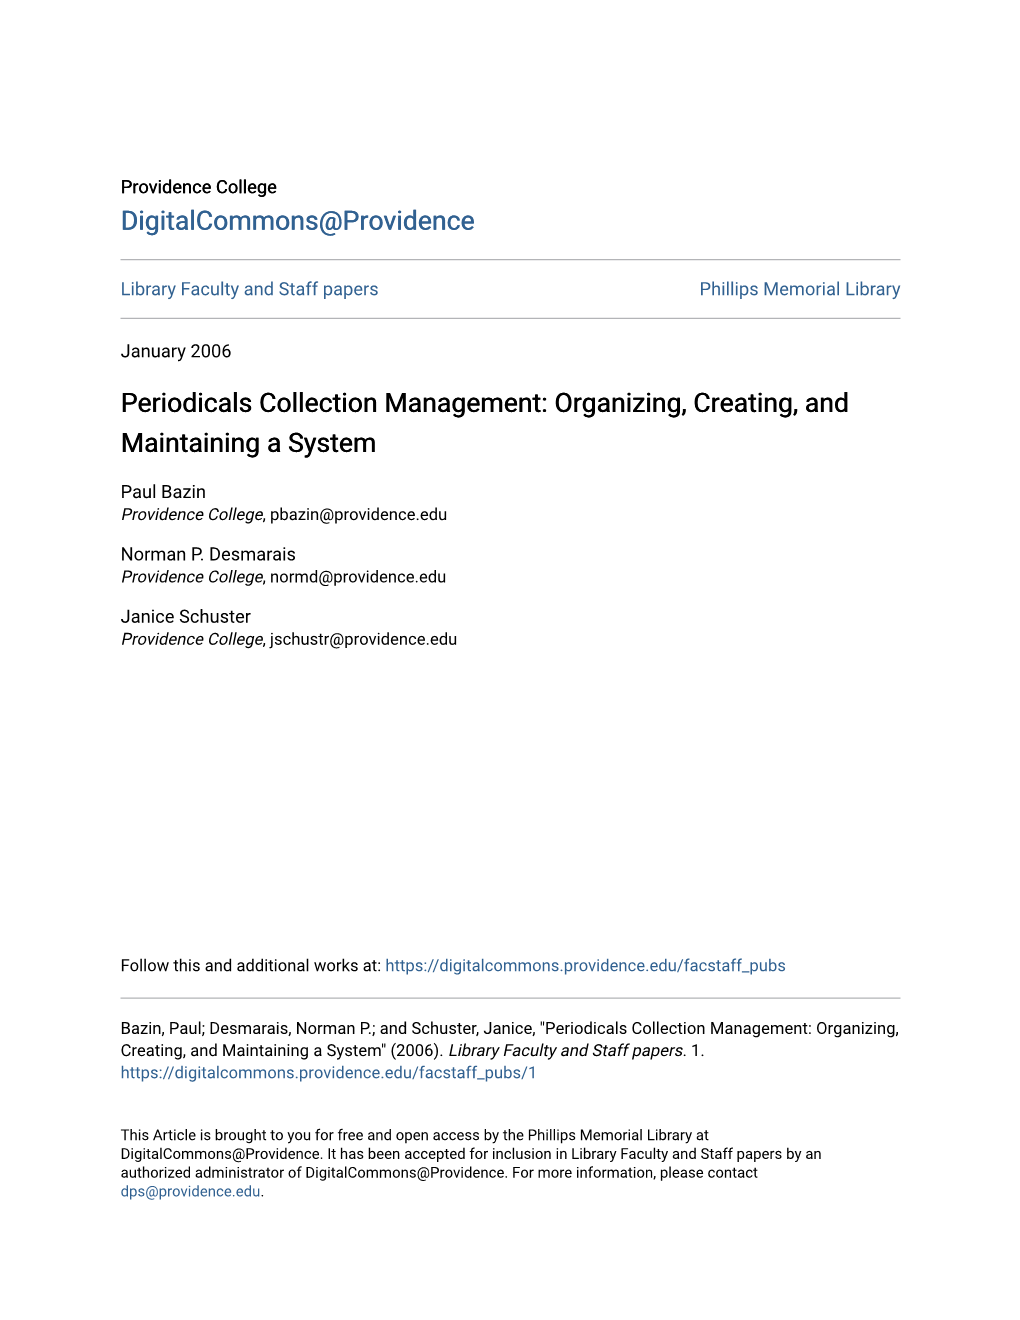 Periodicals Collection Management: Organizing, Creating, and Maintaining a System